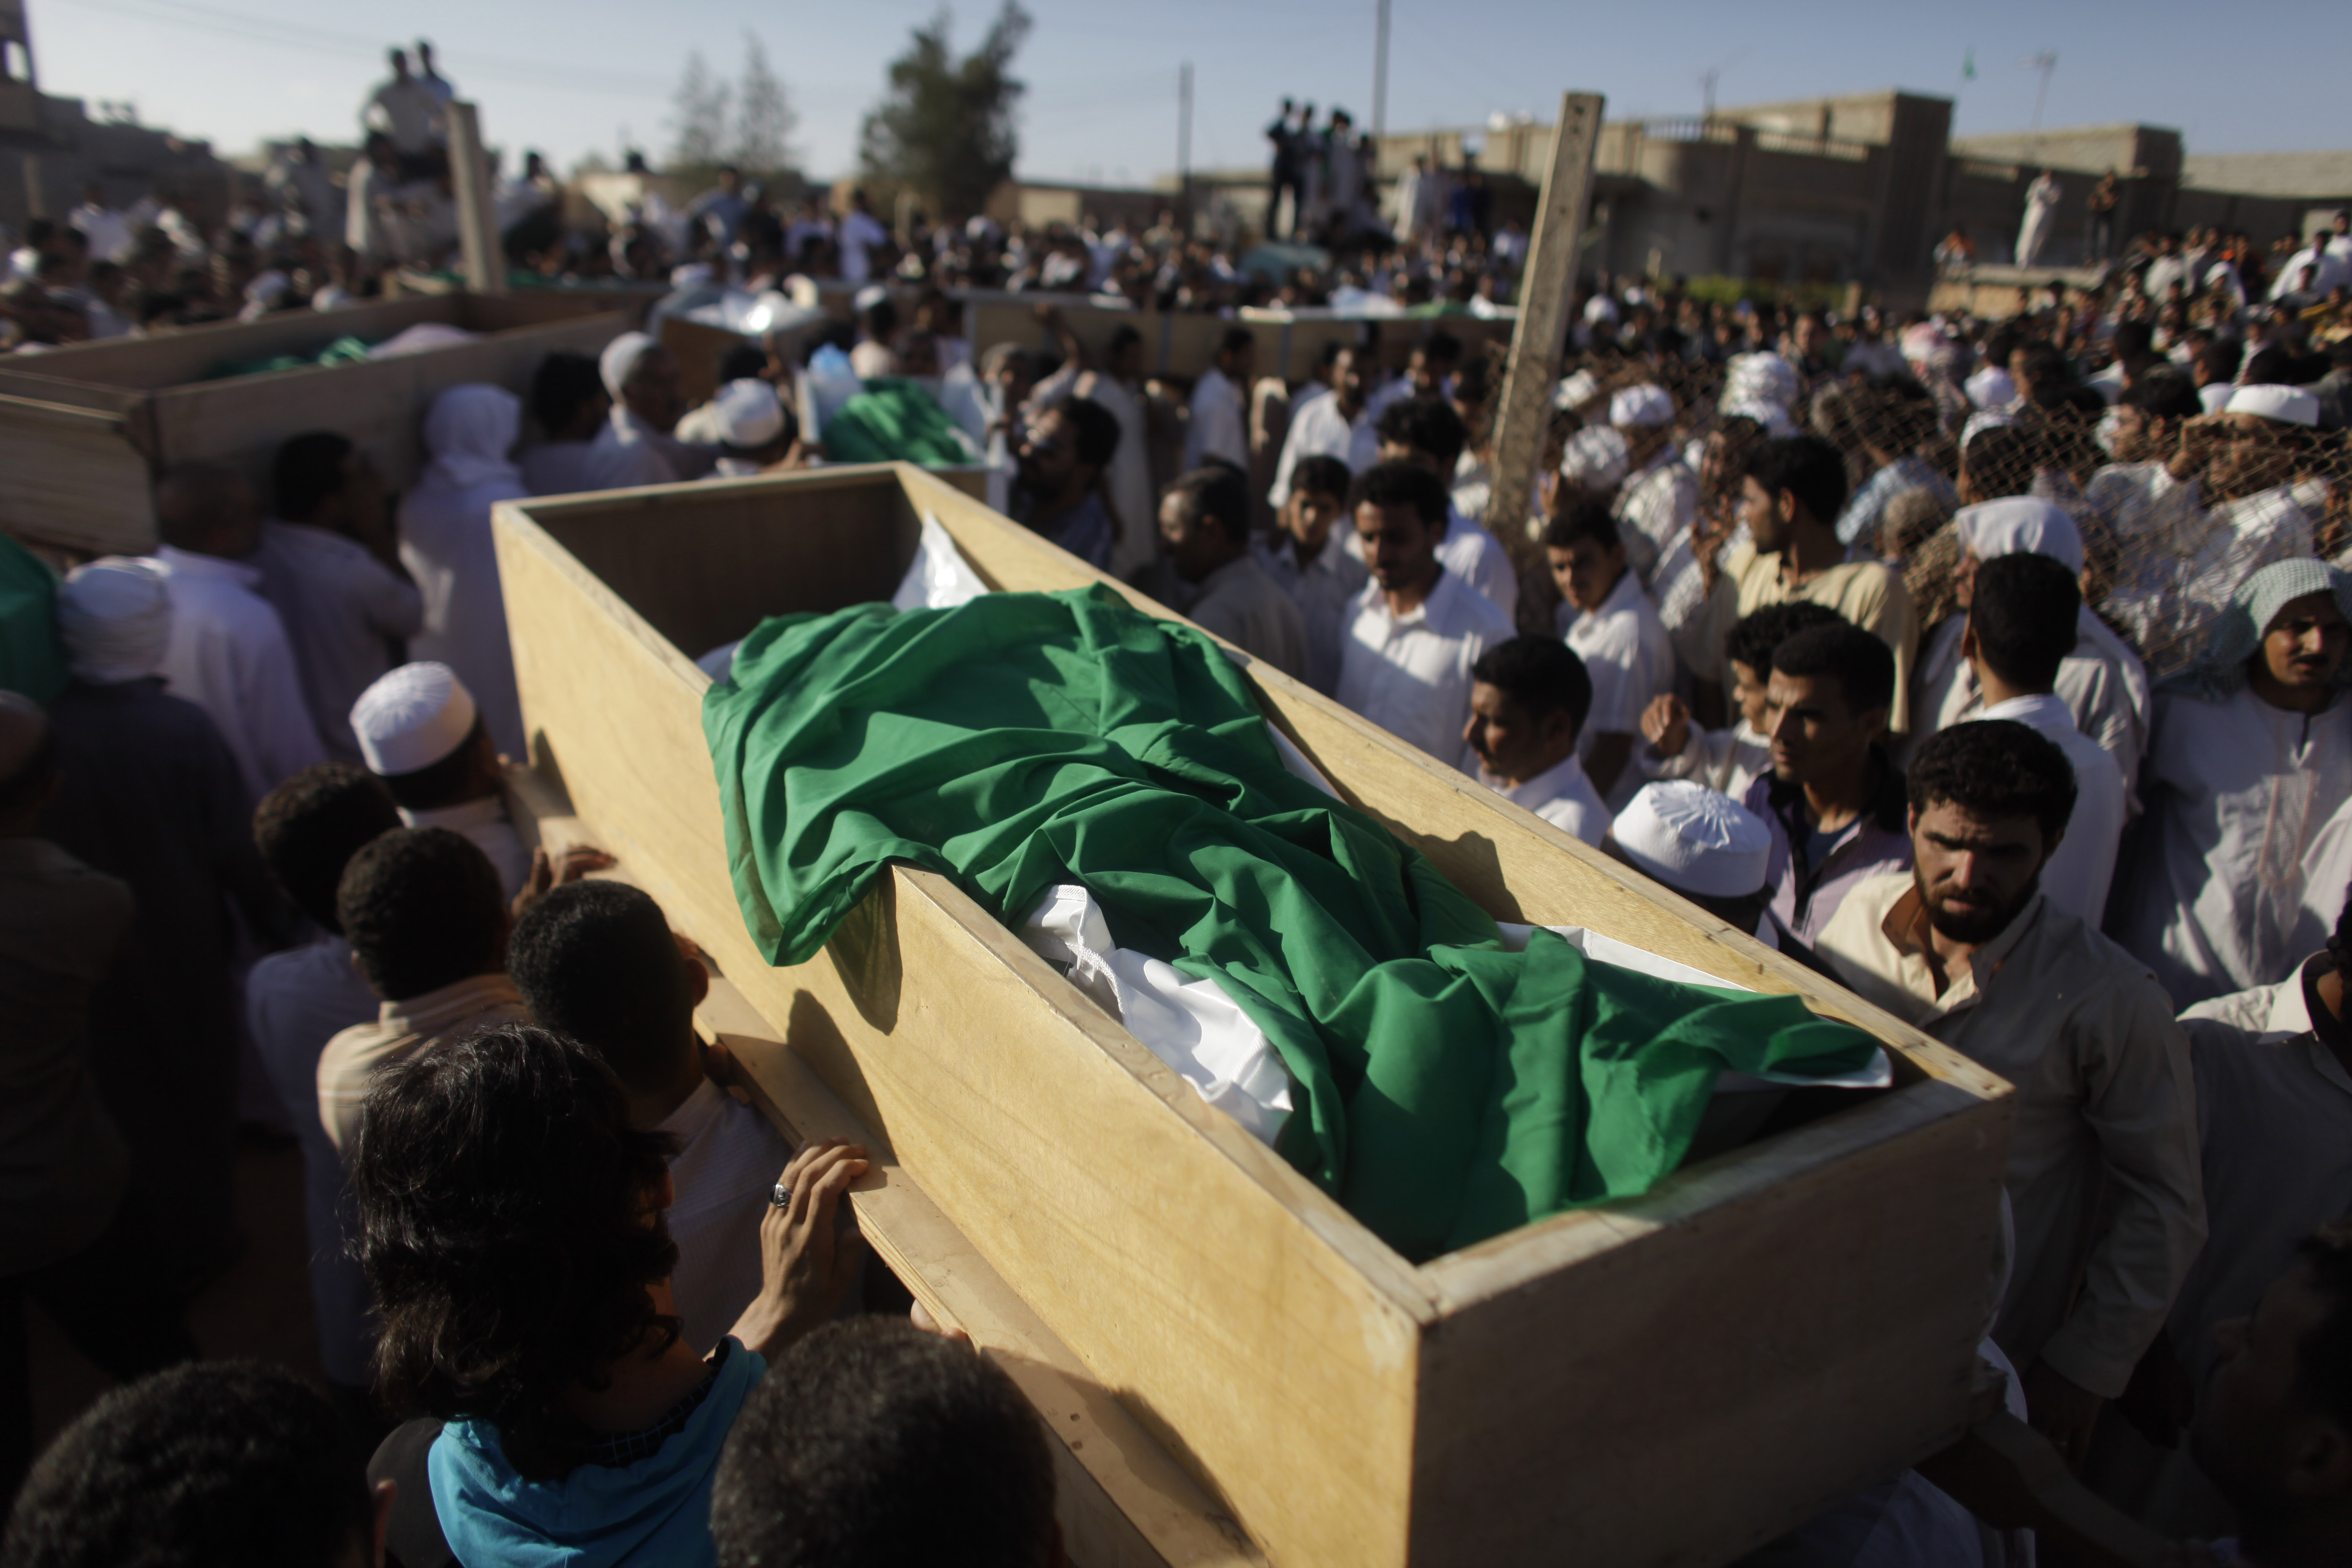 Men carry coffins during the burial of more than two dozen people after an alleged NATO bombing in the town of Majar, near in Zlitan, Libya, Aug. 9, 2011. Several homes were hit and reportedly 28 people, some of them women and children, were later buried. (AP/Dario Lopez-Mills)